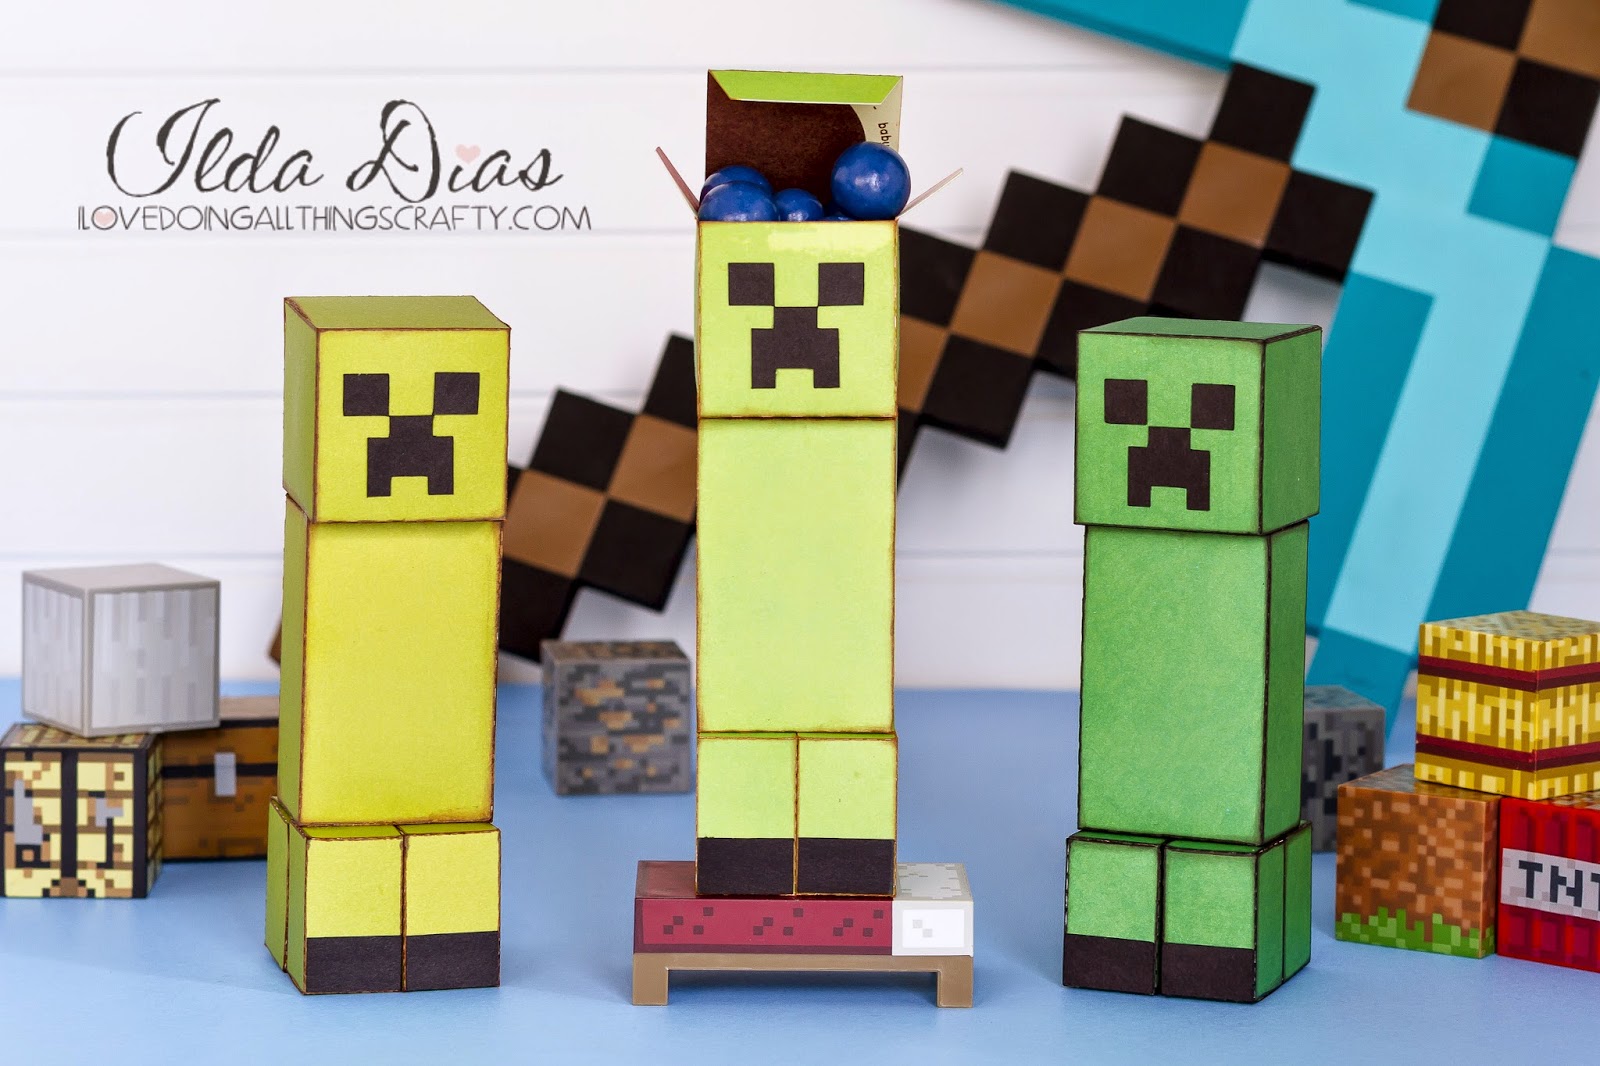 I Love Doing All Things Crafty: 3D Paper Minecraft Creeper Treat Box